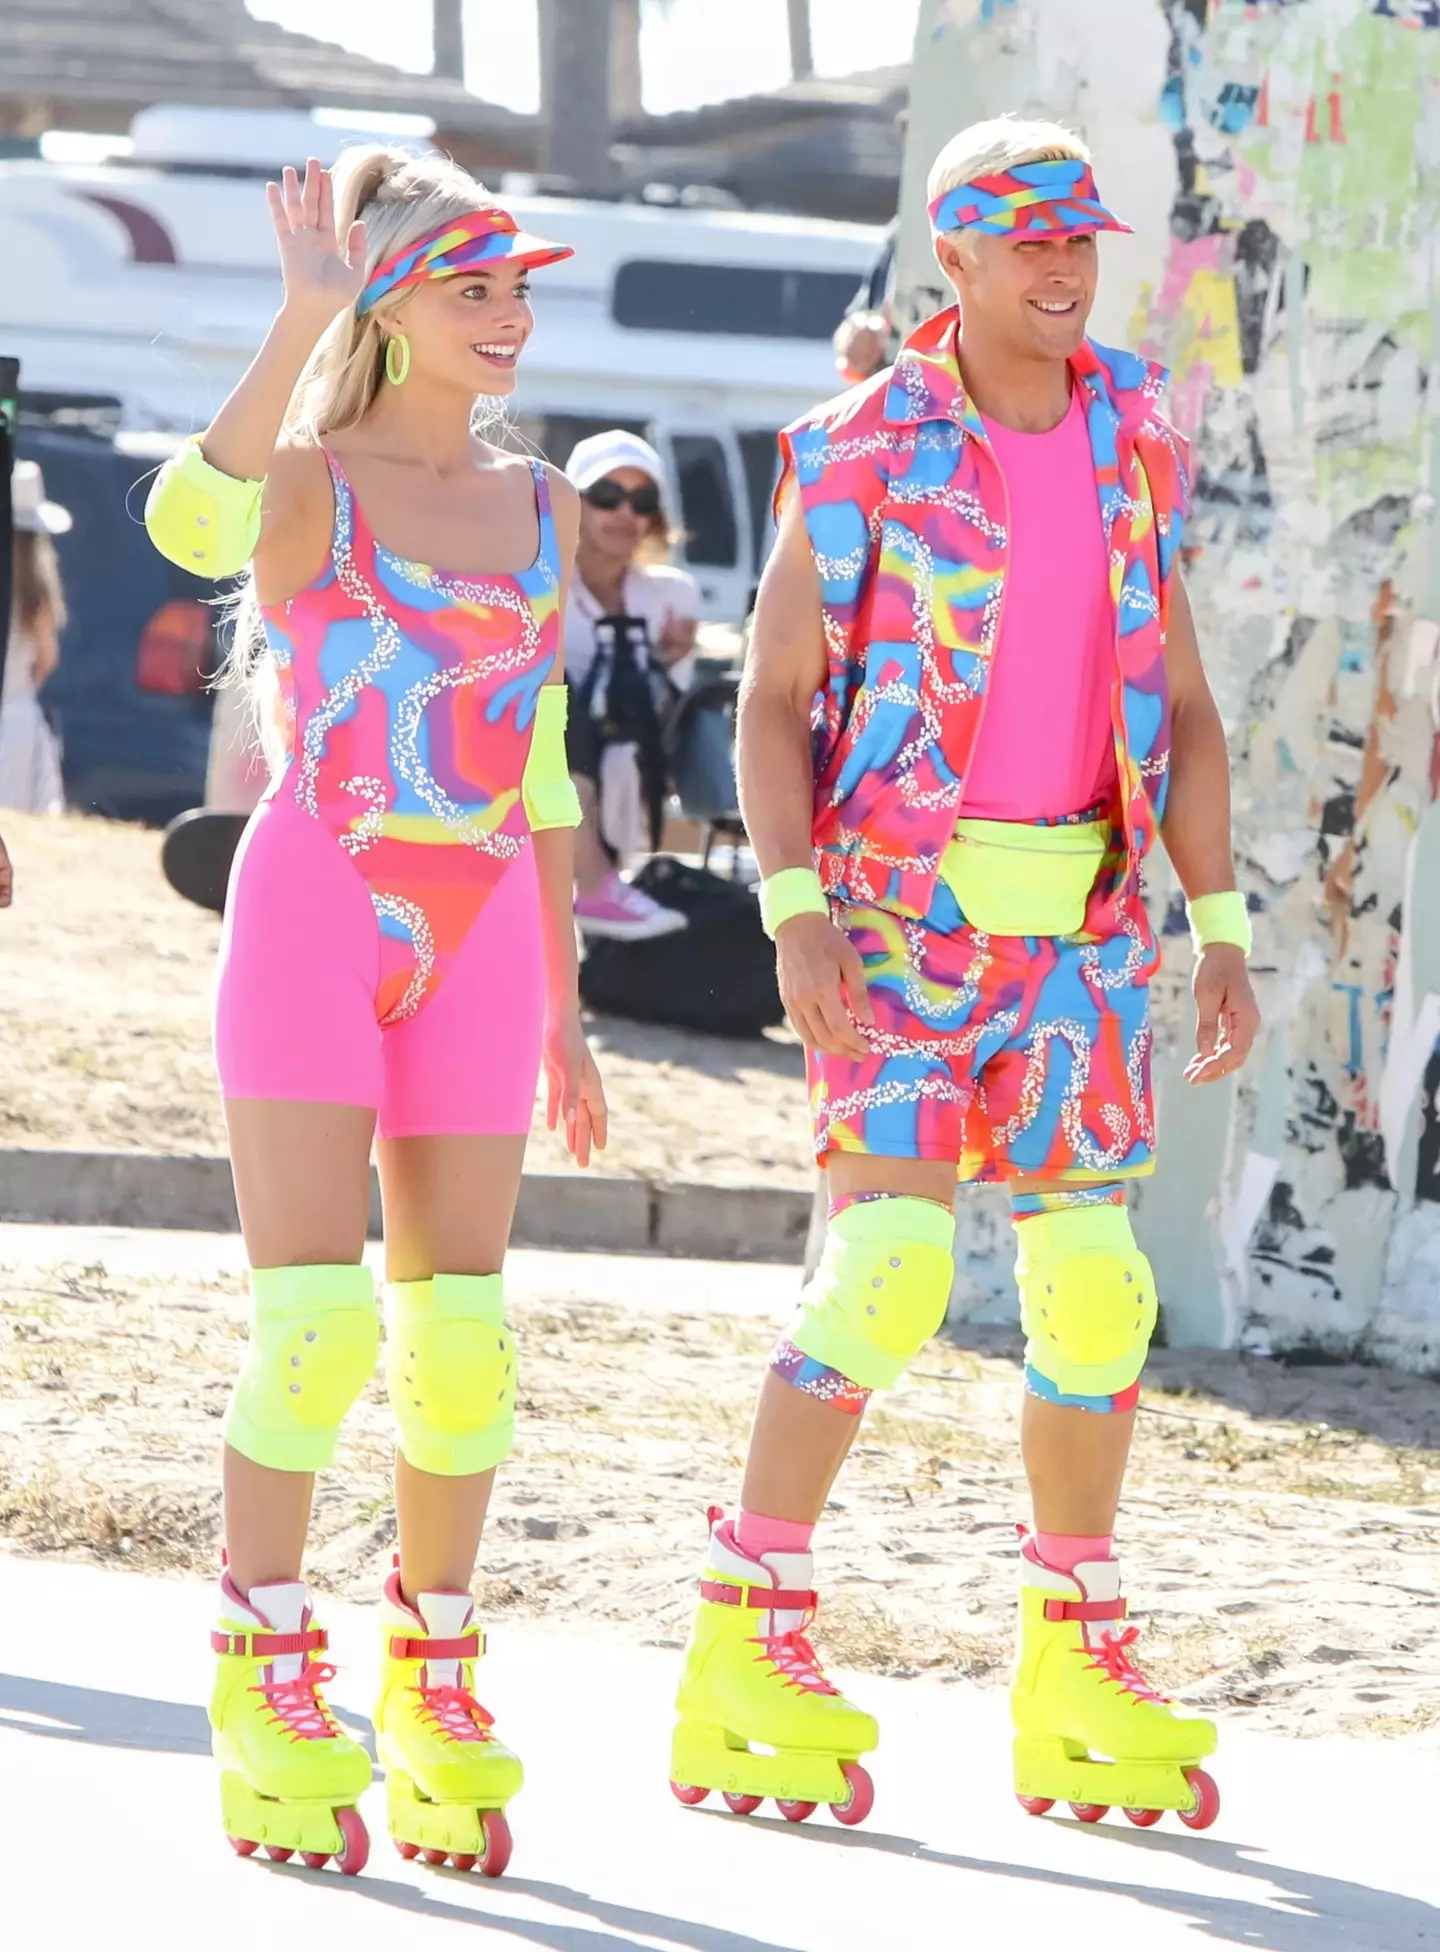 Margot Robbie and Ryan Gosling were papped filming Barbie in their matching outfits.